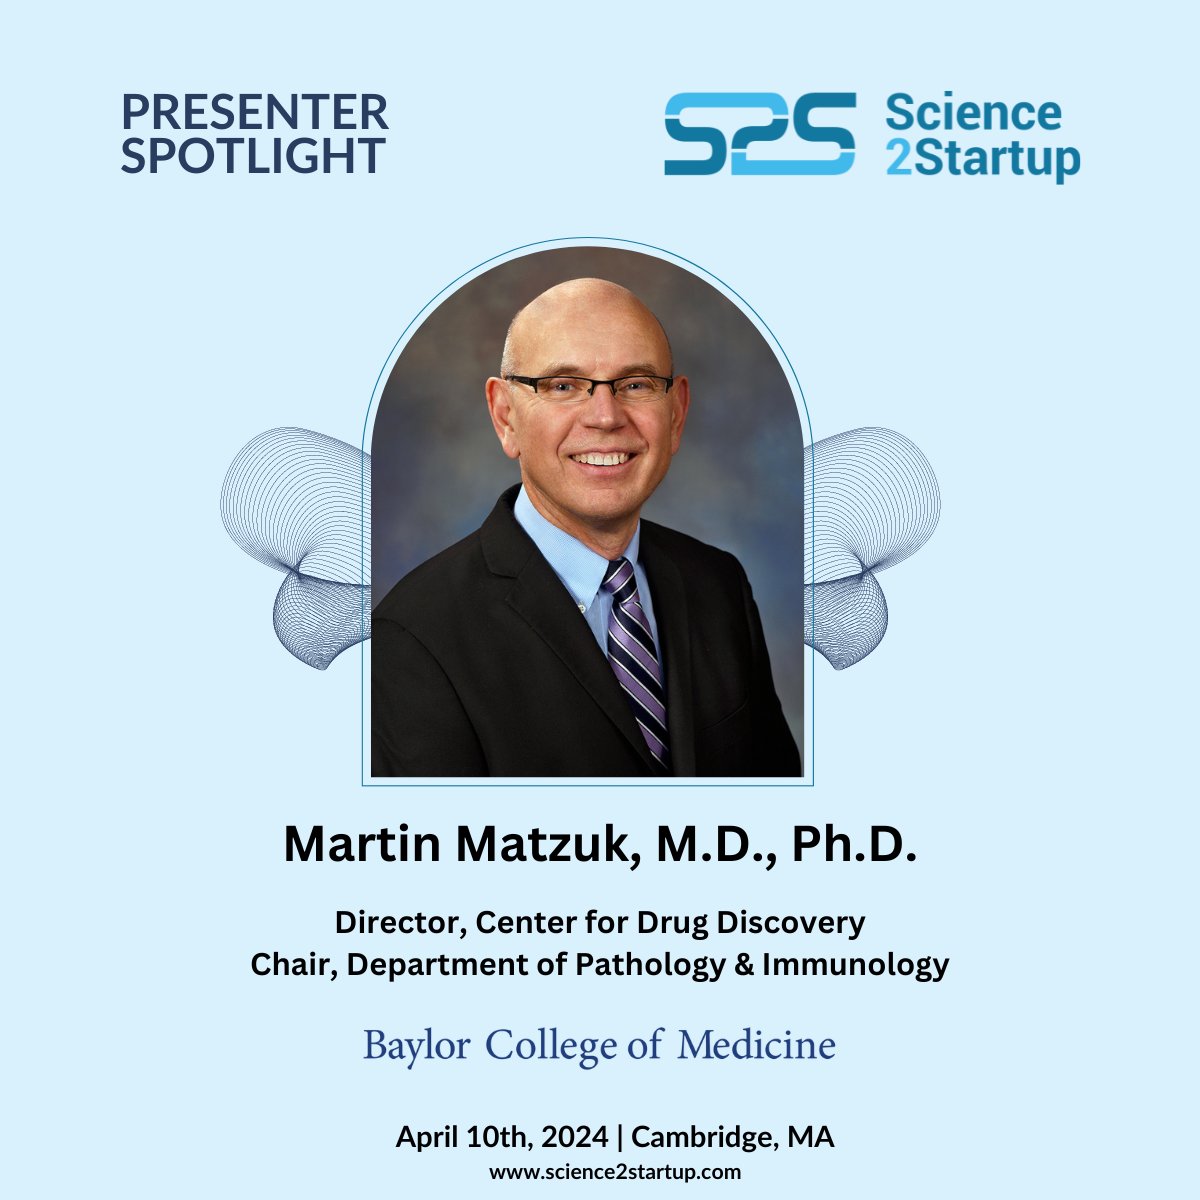 We're excited to share today's #Science2Startup presenter spotlight: Martin Matzuk, M.D., Ph.D. Matzuk’s presentation will focus on: “Targeting Opportunistic Kinases for Treatment of Endometriosis” Follow along for updates! @bcmhouston @BCMFromtheLabs